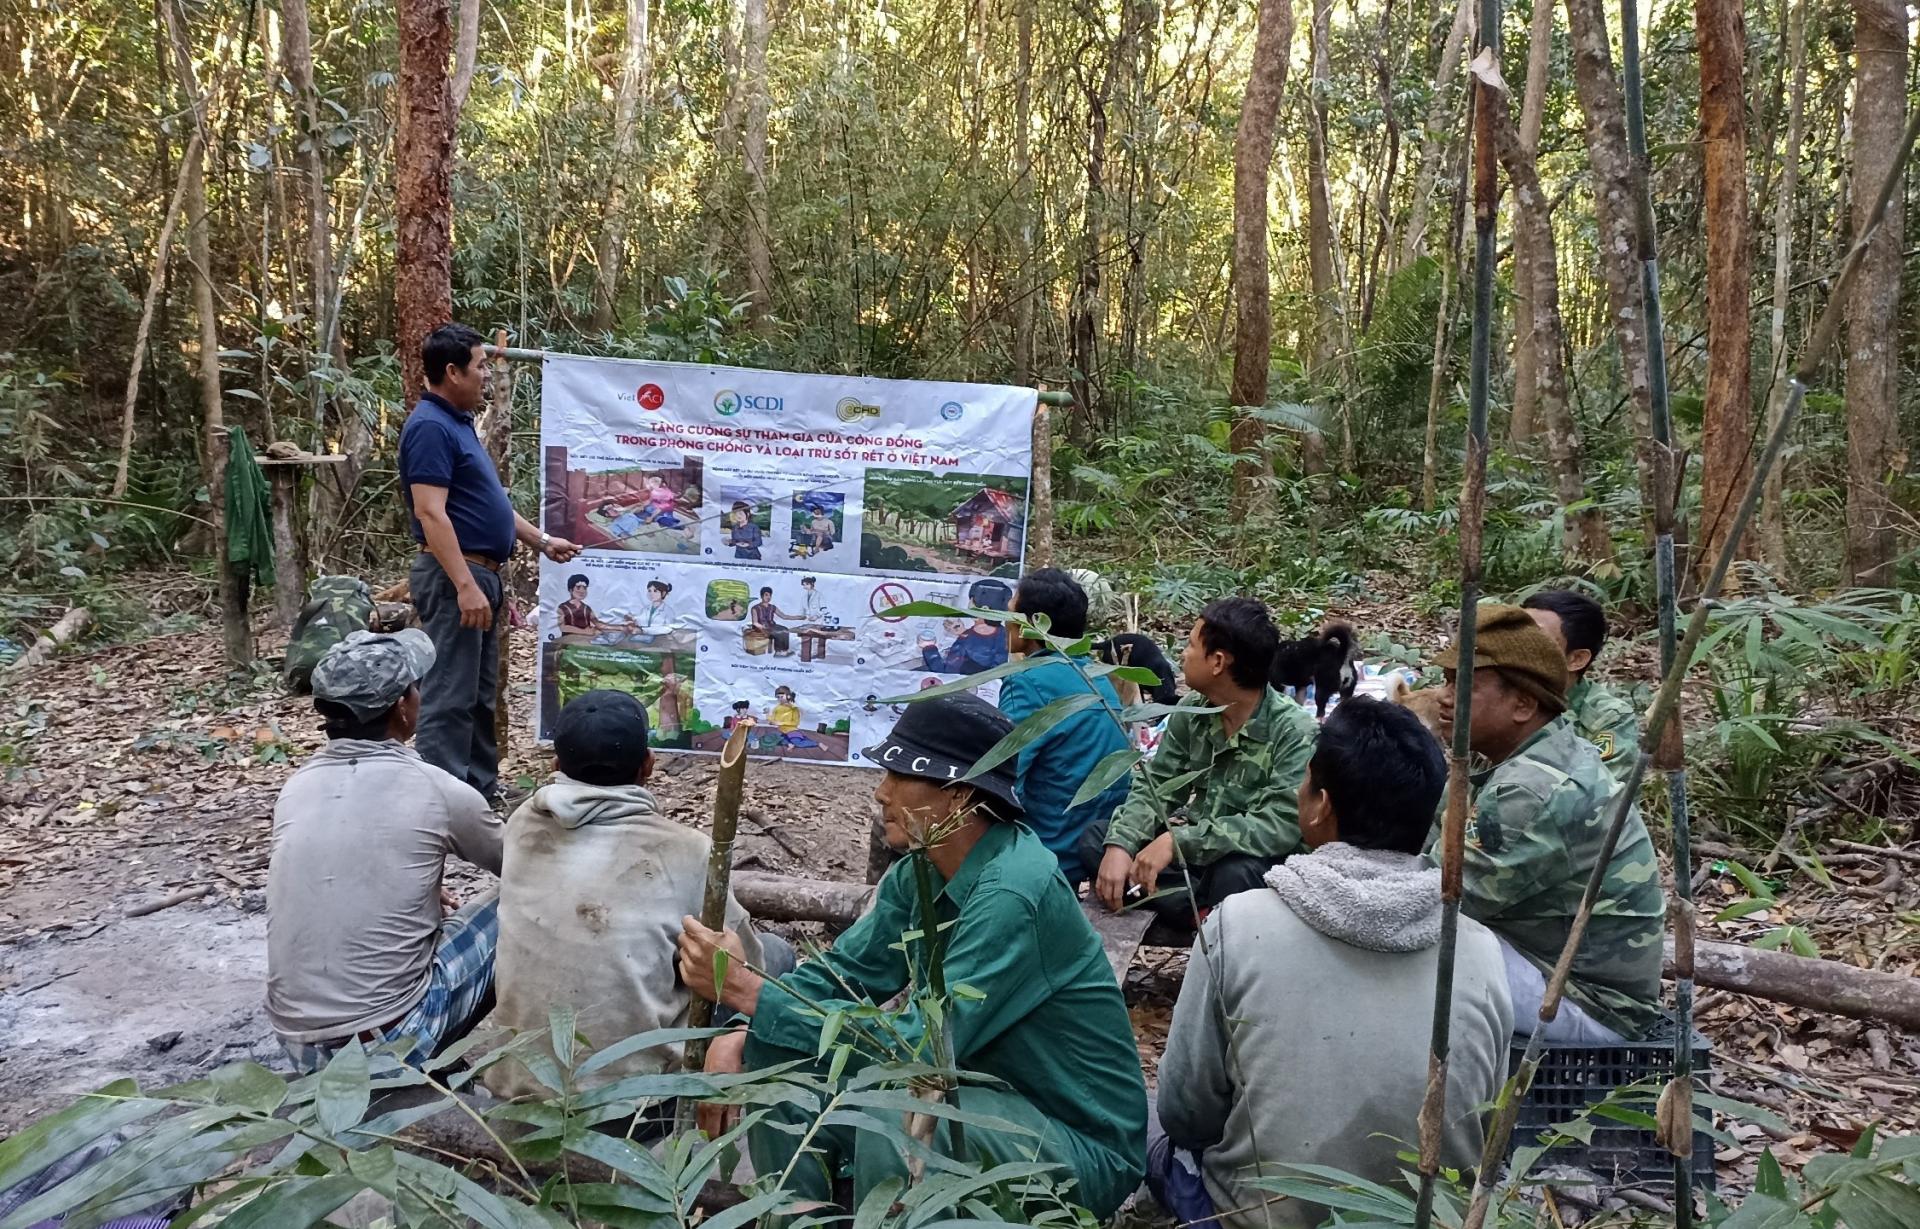 A CMAT member conducts a health education session on malaria for mobile and migrant populations in the forest. Photo: SCDI